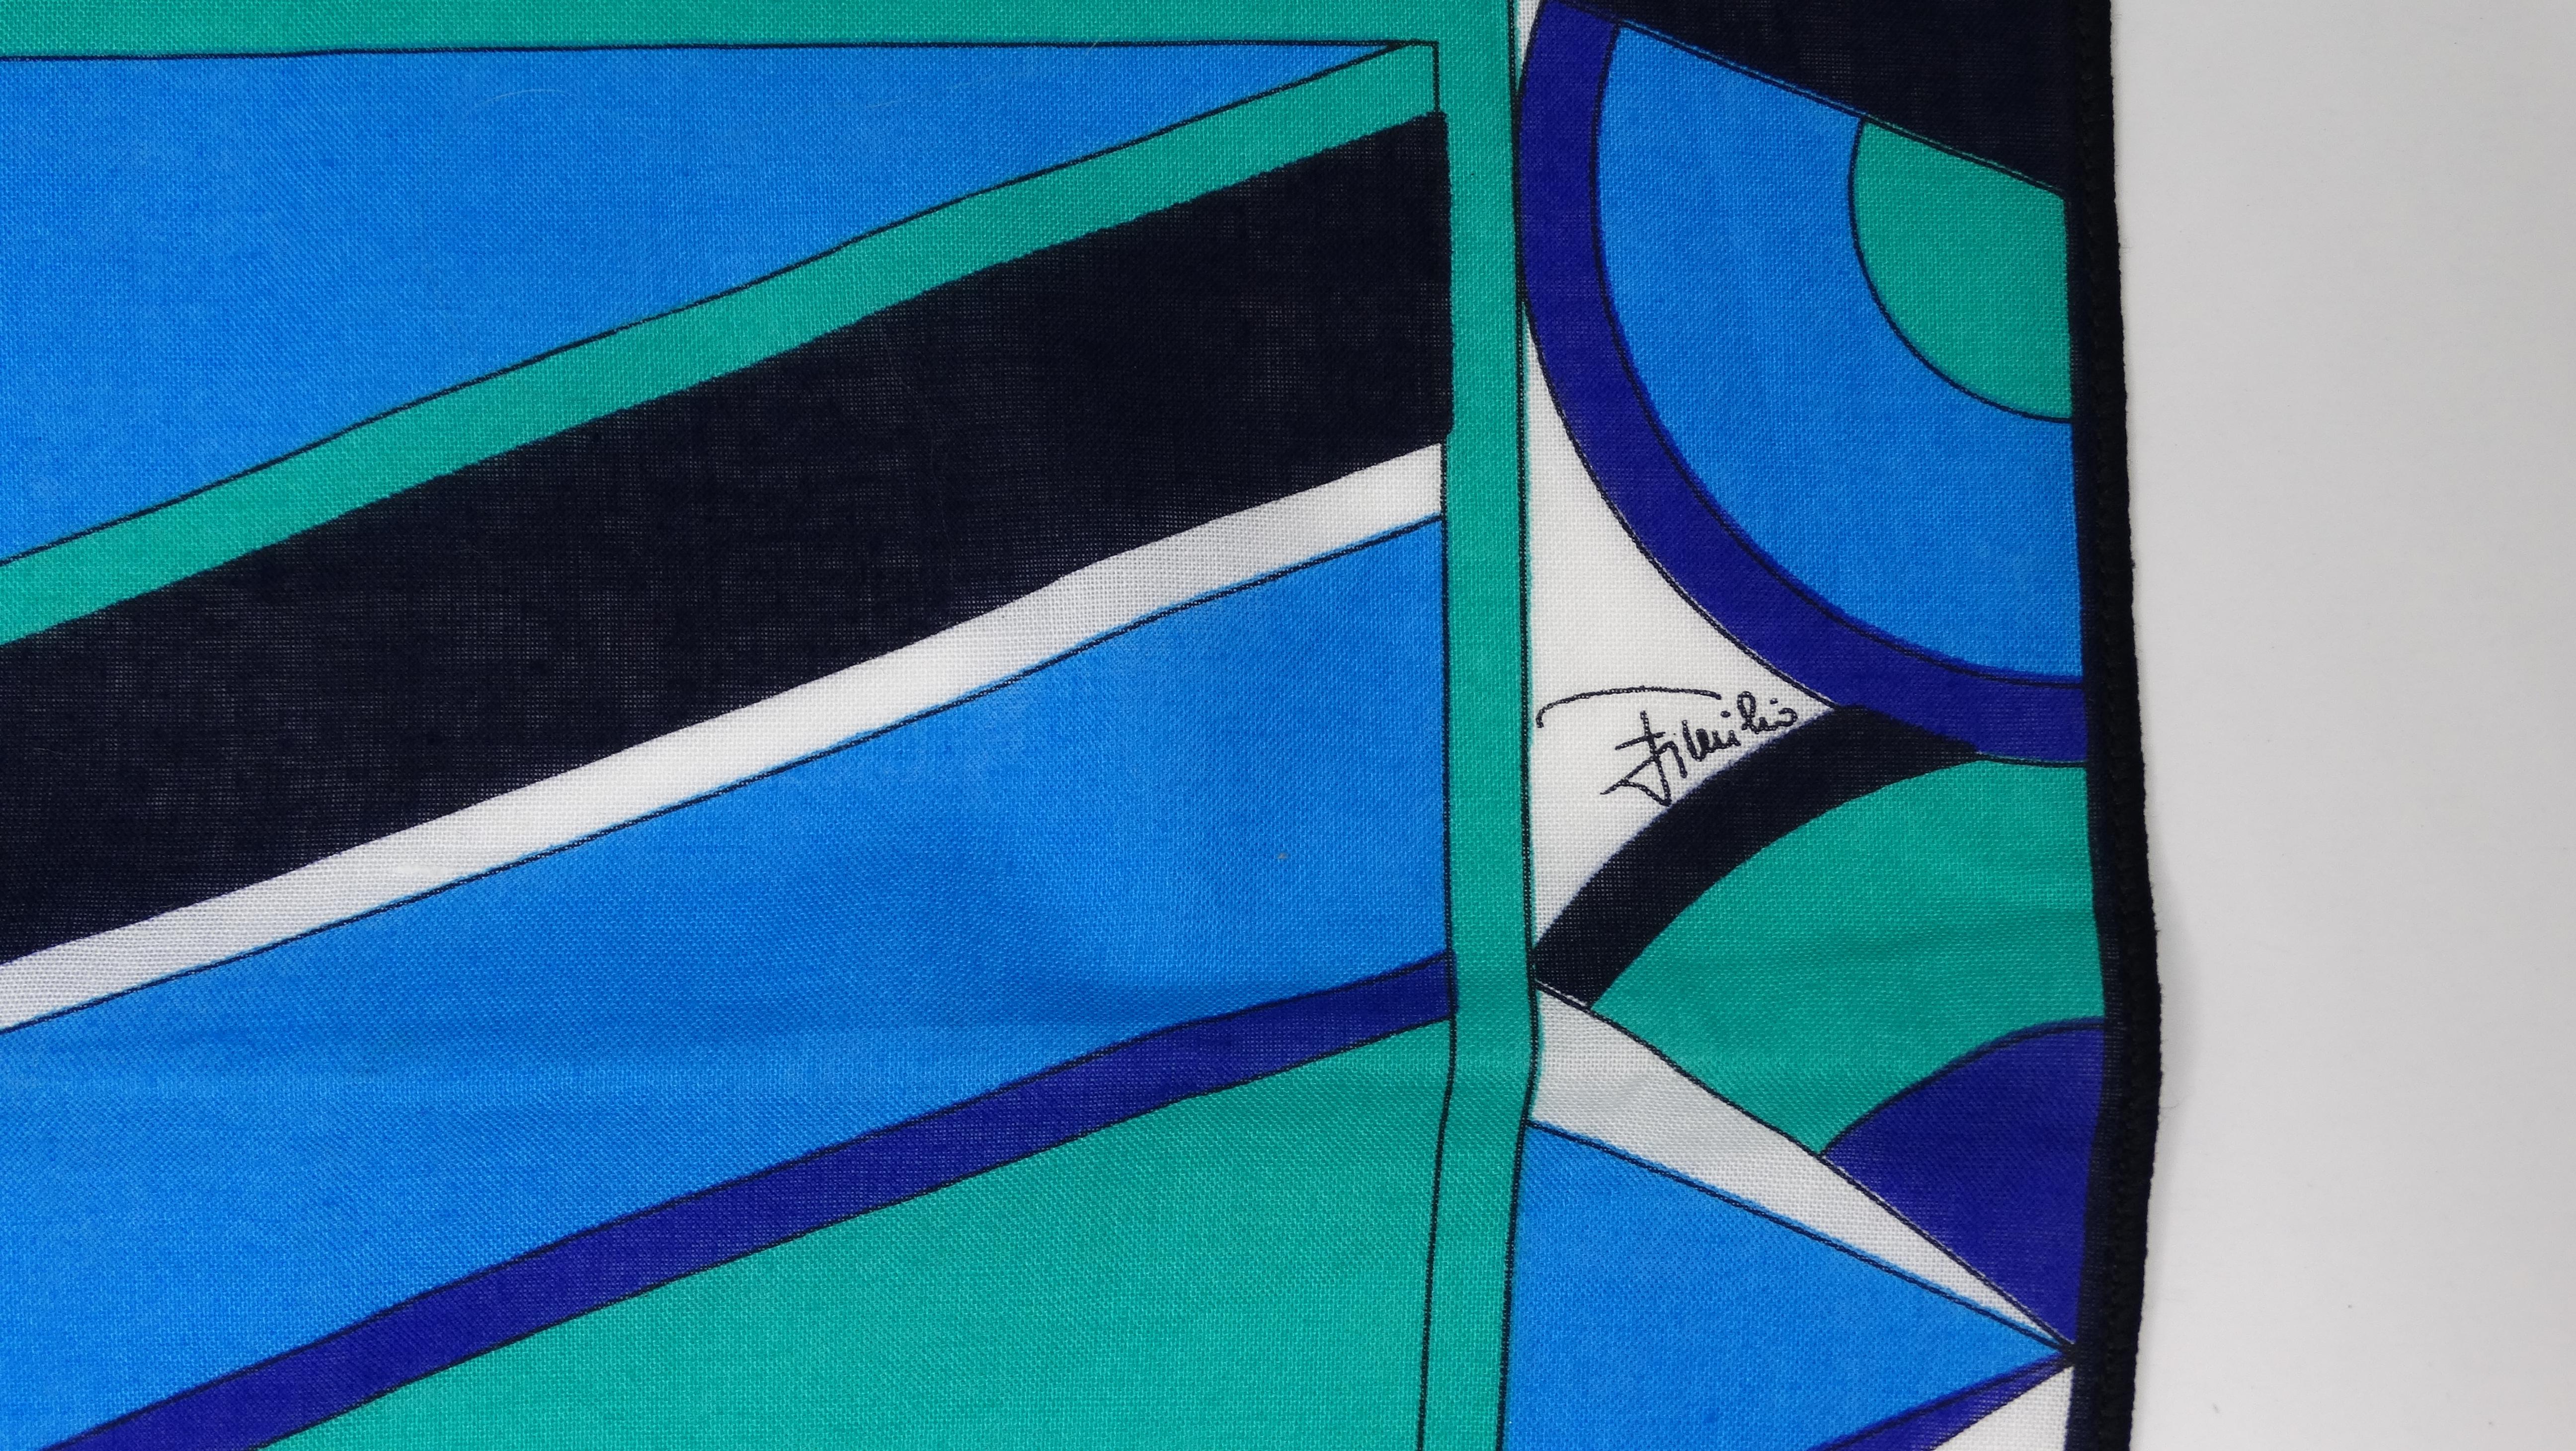 Add this Pucci to your collection! Circa 1960s, this adorable cotton scarf features one of Pucci's signature abstract designs with various shapes in shades of green, blue, black and white. Geometric trim. Emilio Pucci written throughout, made in